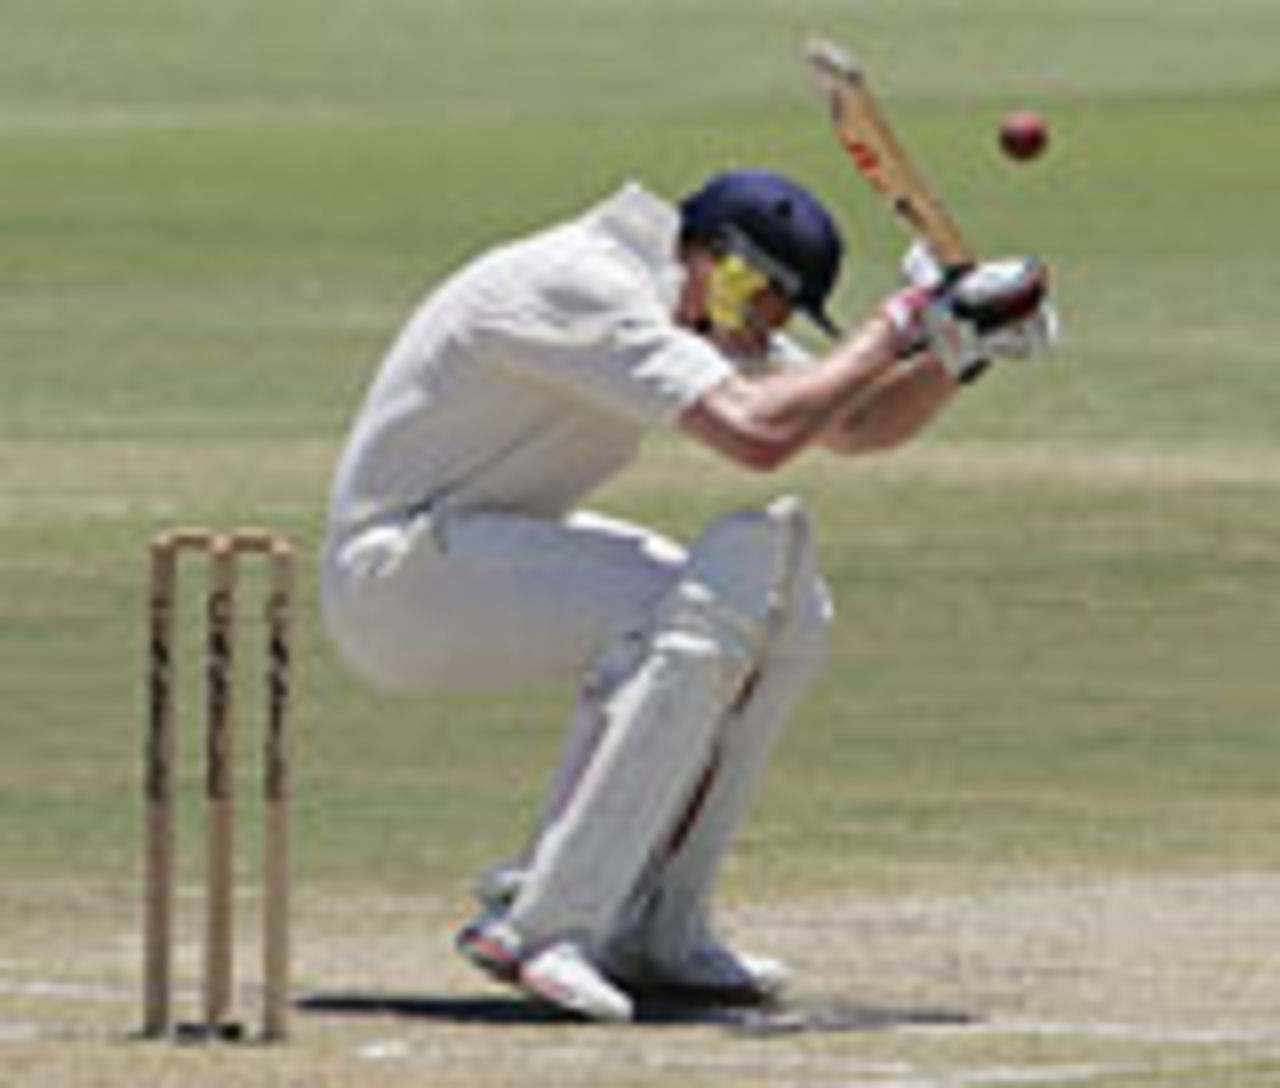 Andrew Flinotff ducks a short one, South Africa v England, 2nd Test, Durban, 4th day, December 29 2004